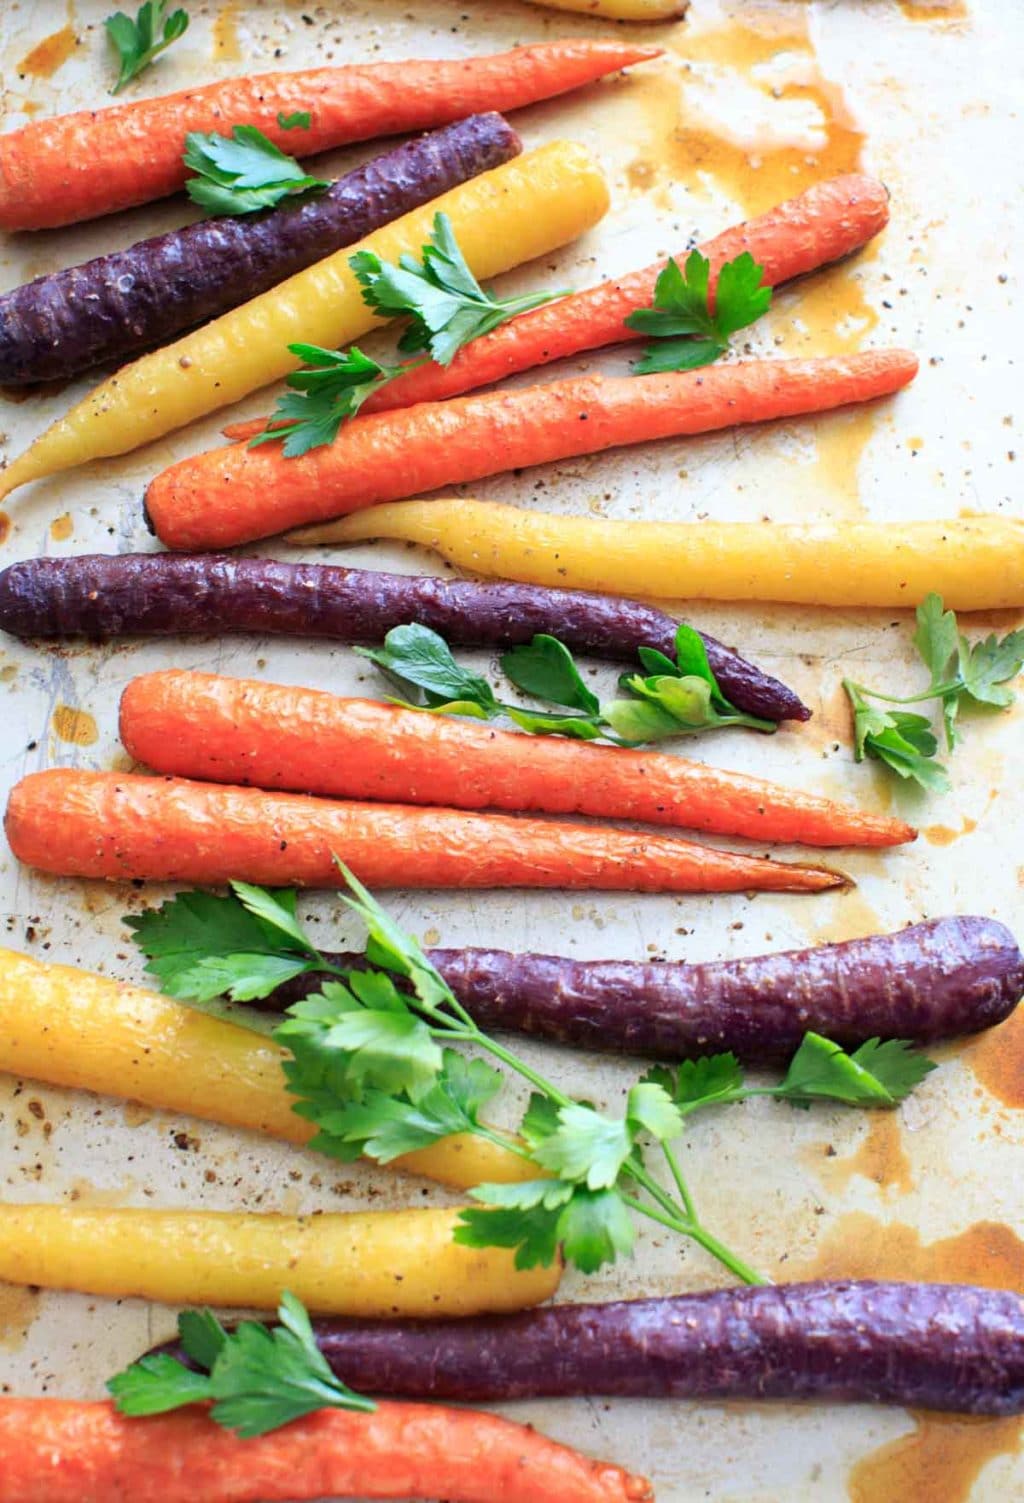 Maple roasted carrots after roasting